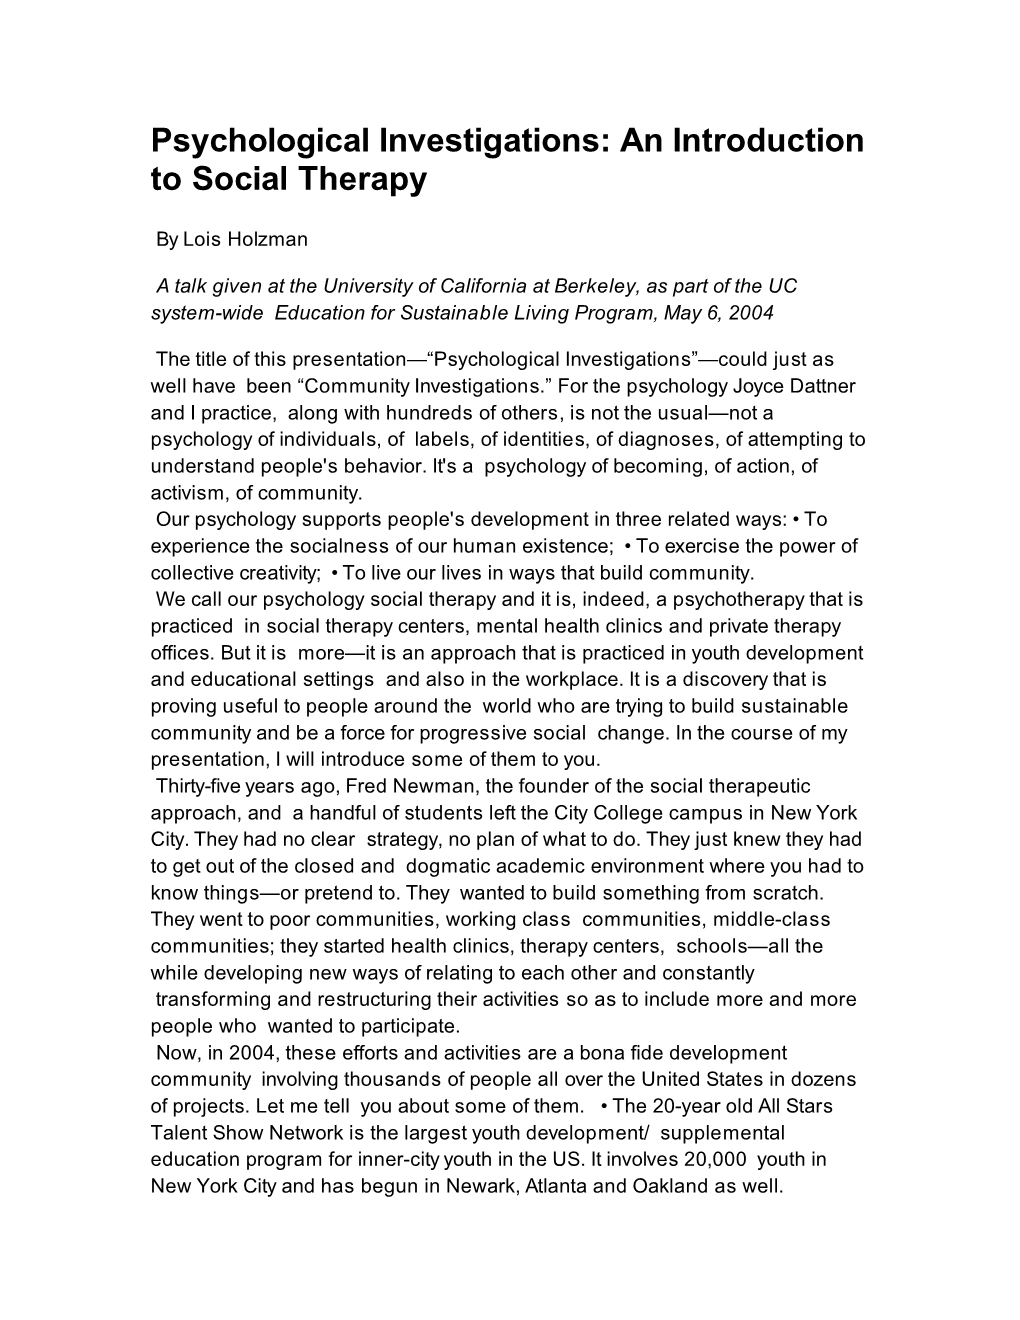 Psychological Investigations: an Introduction to Social Therapy